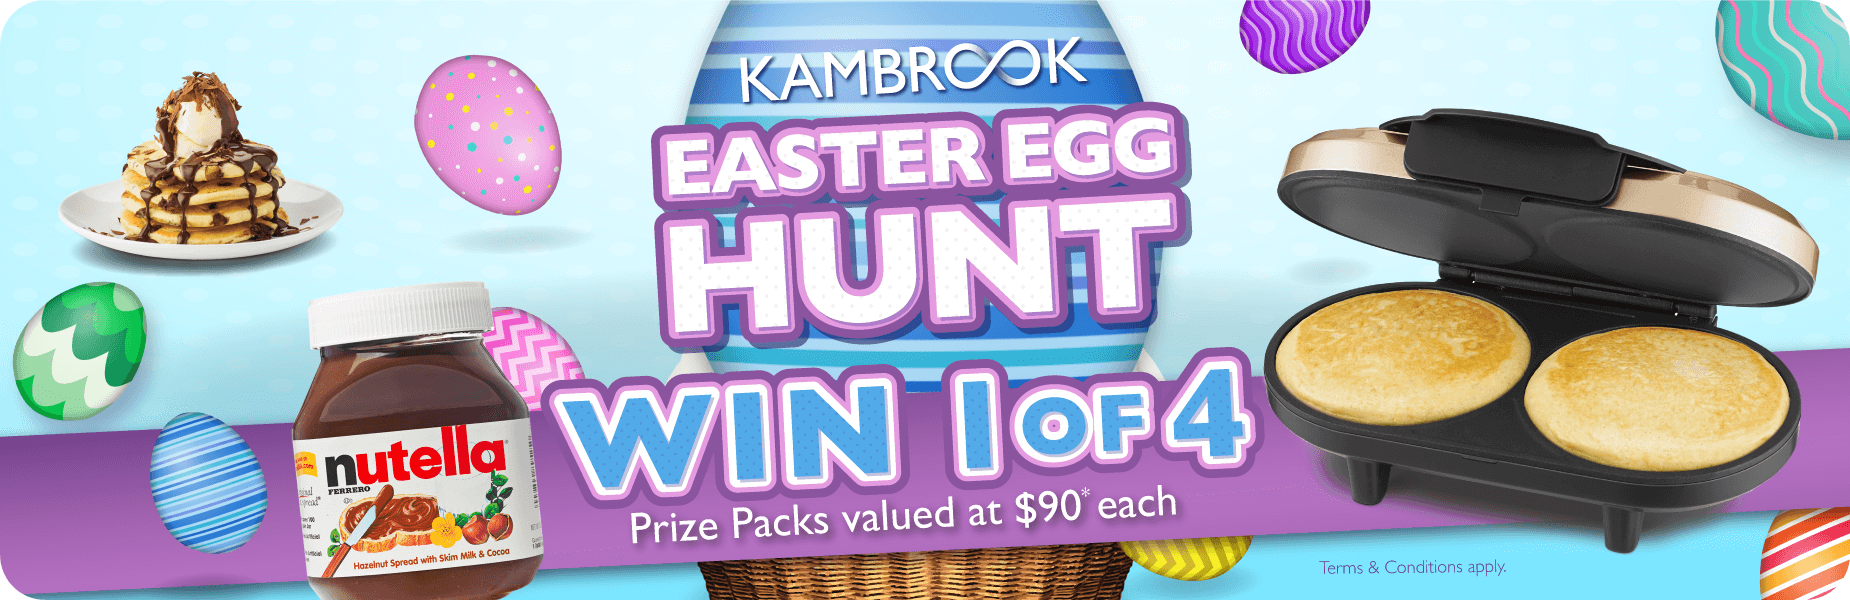 KAM-EasterEggHunt-Competition-Social_RGCcasestudy.png